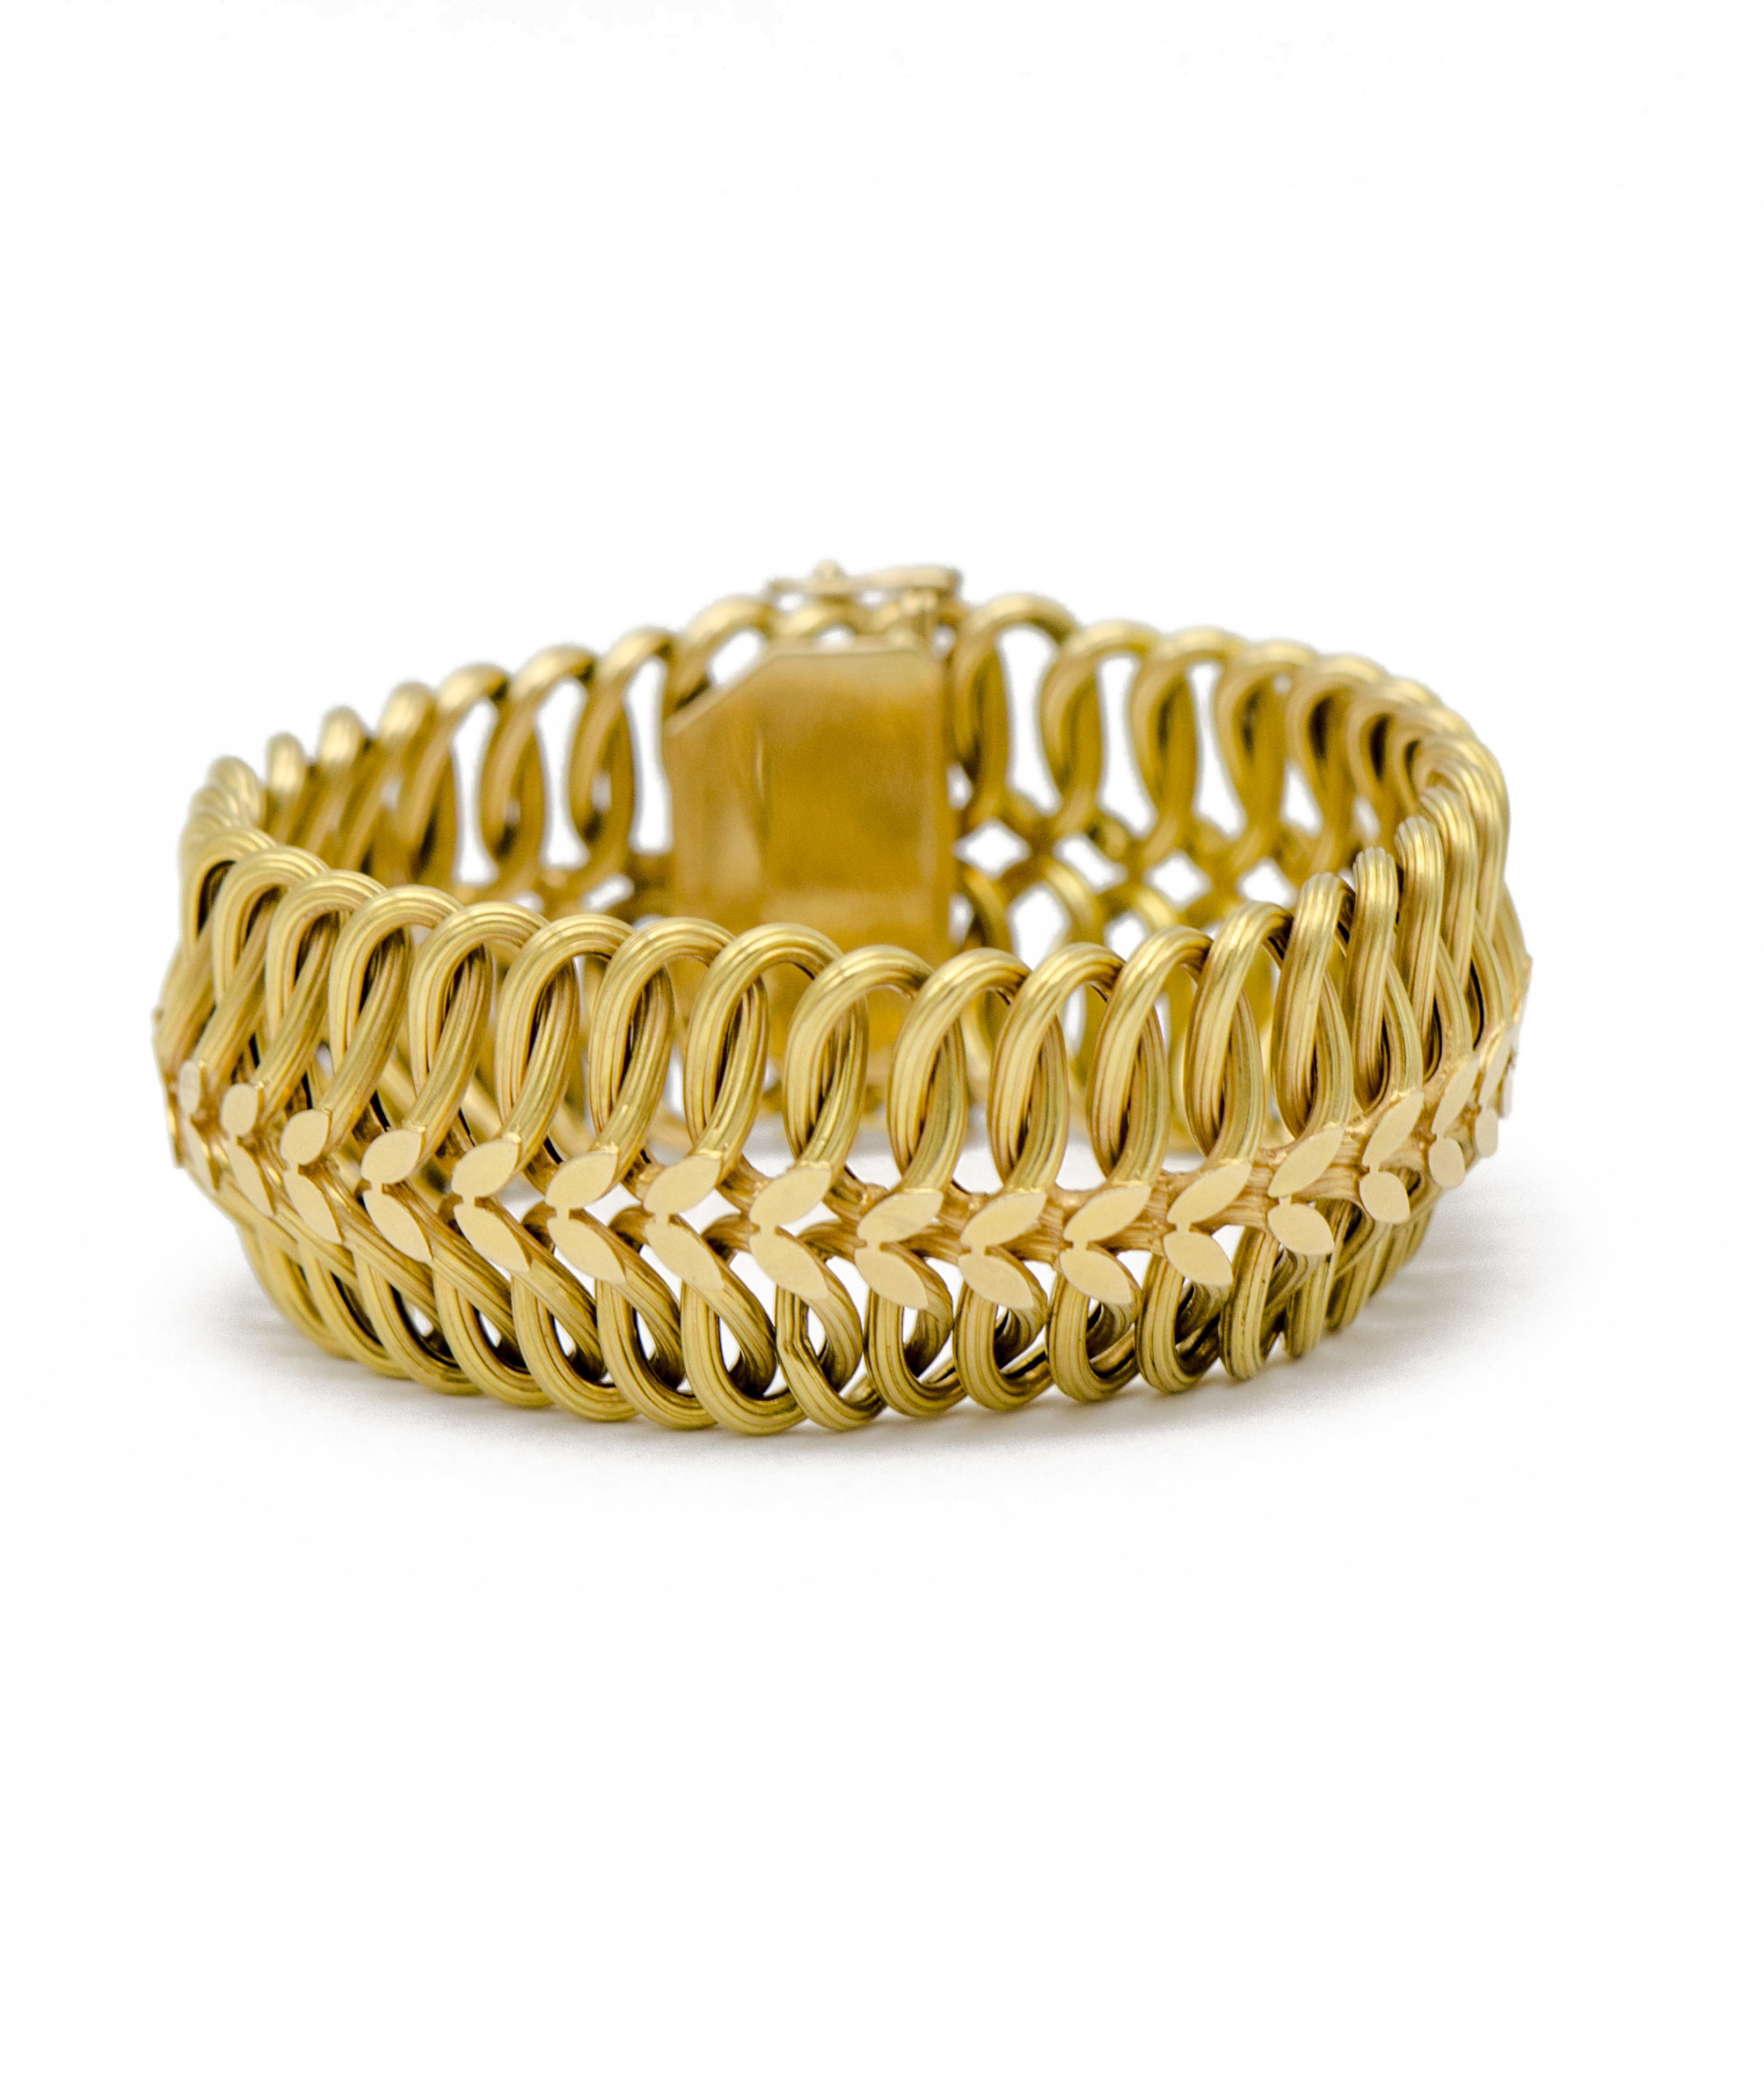 Dowling Brothers - Gold Woven Chain Bracelet in Black